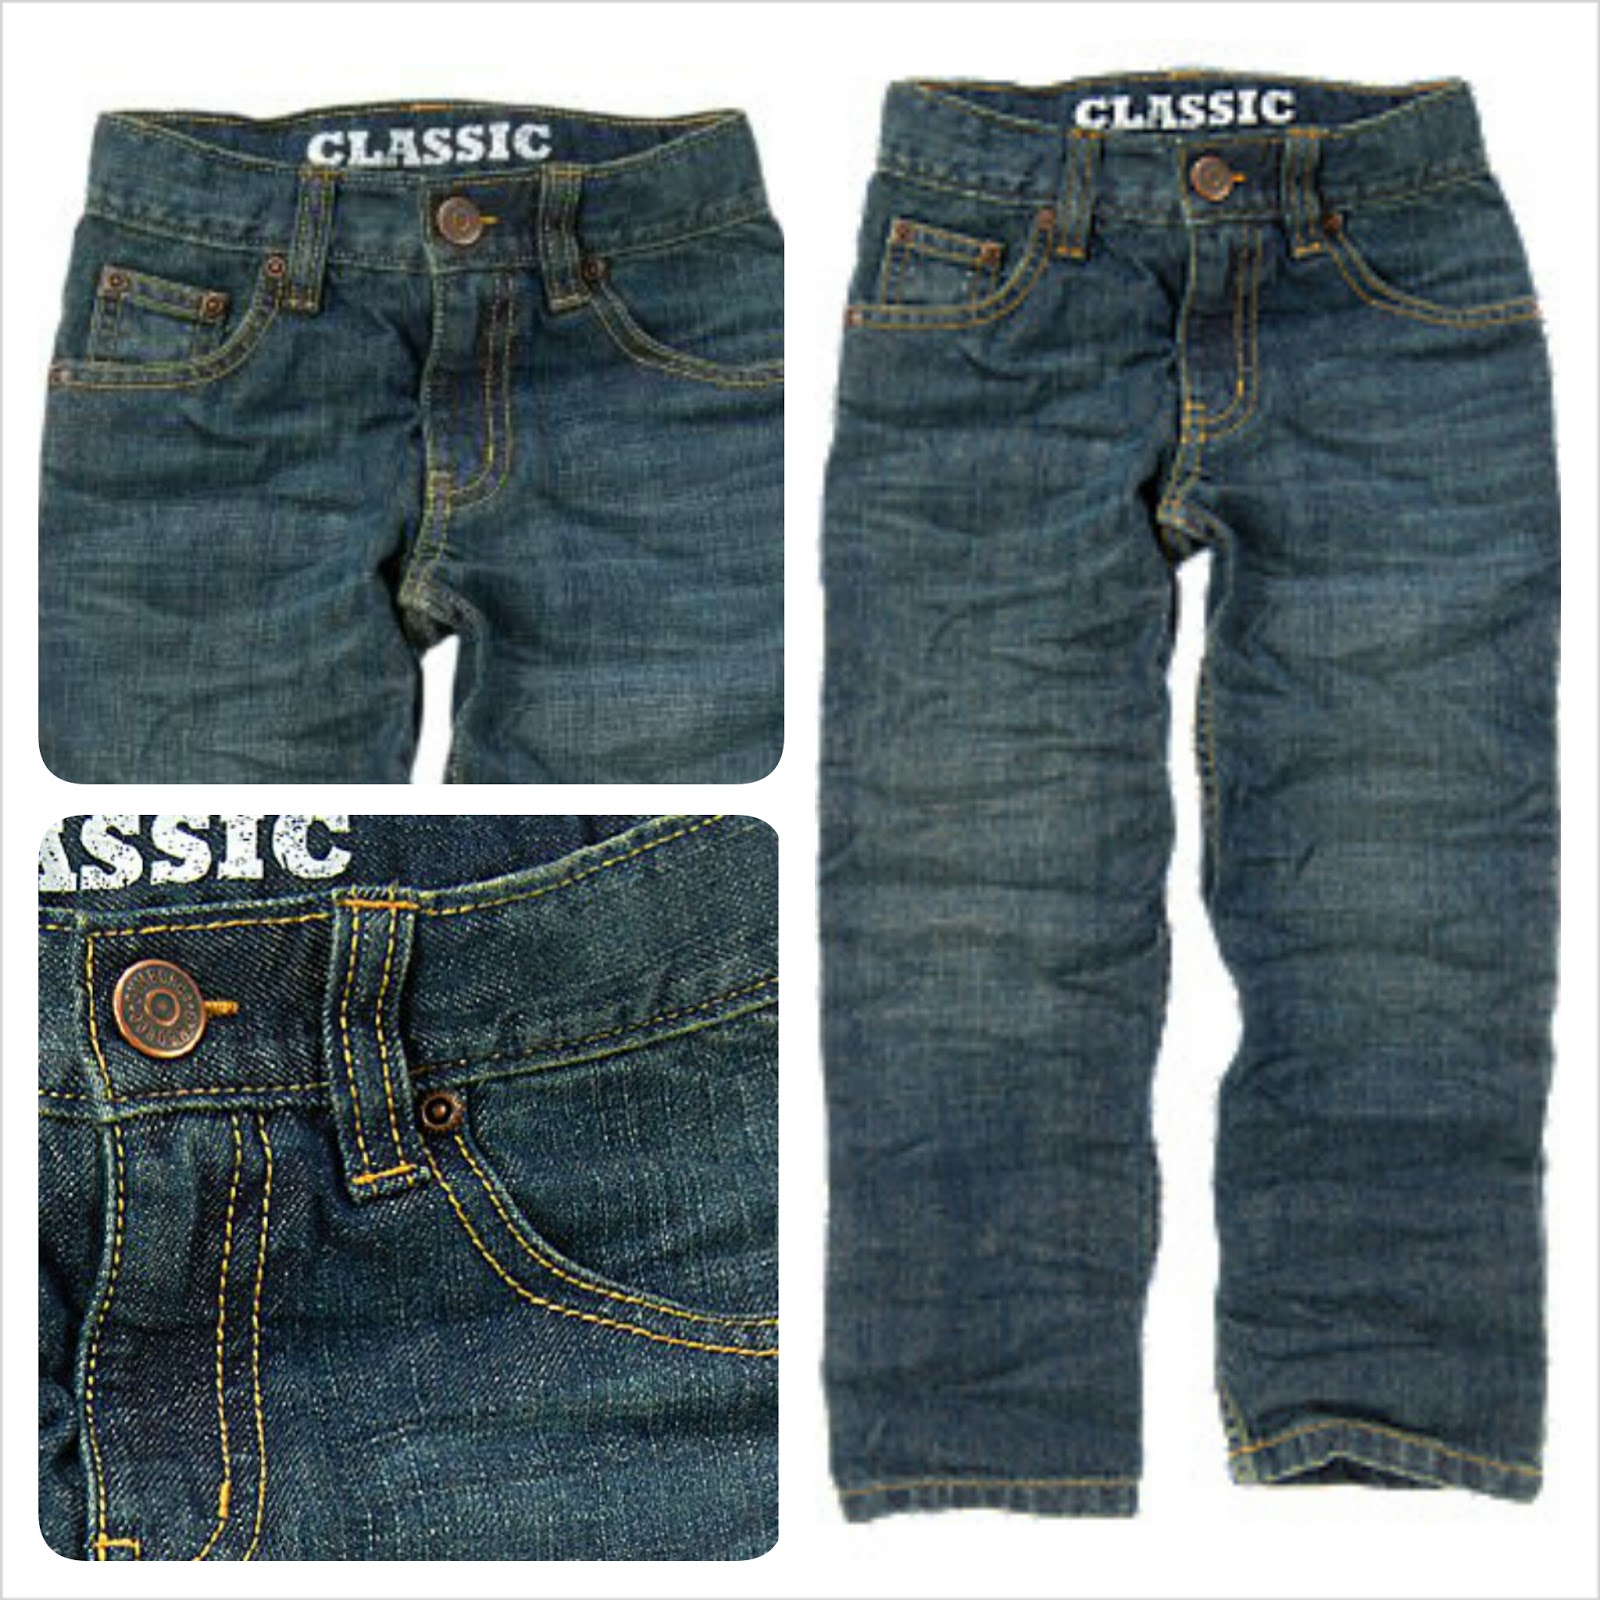 Threads for Tots: #25 Classic Jeans (Medium Wash)